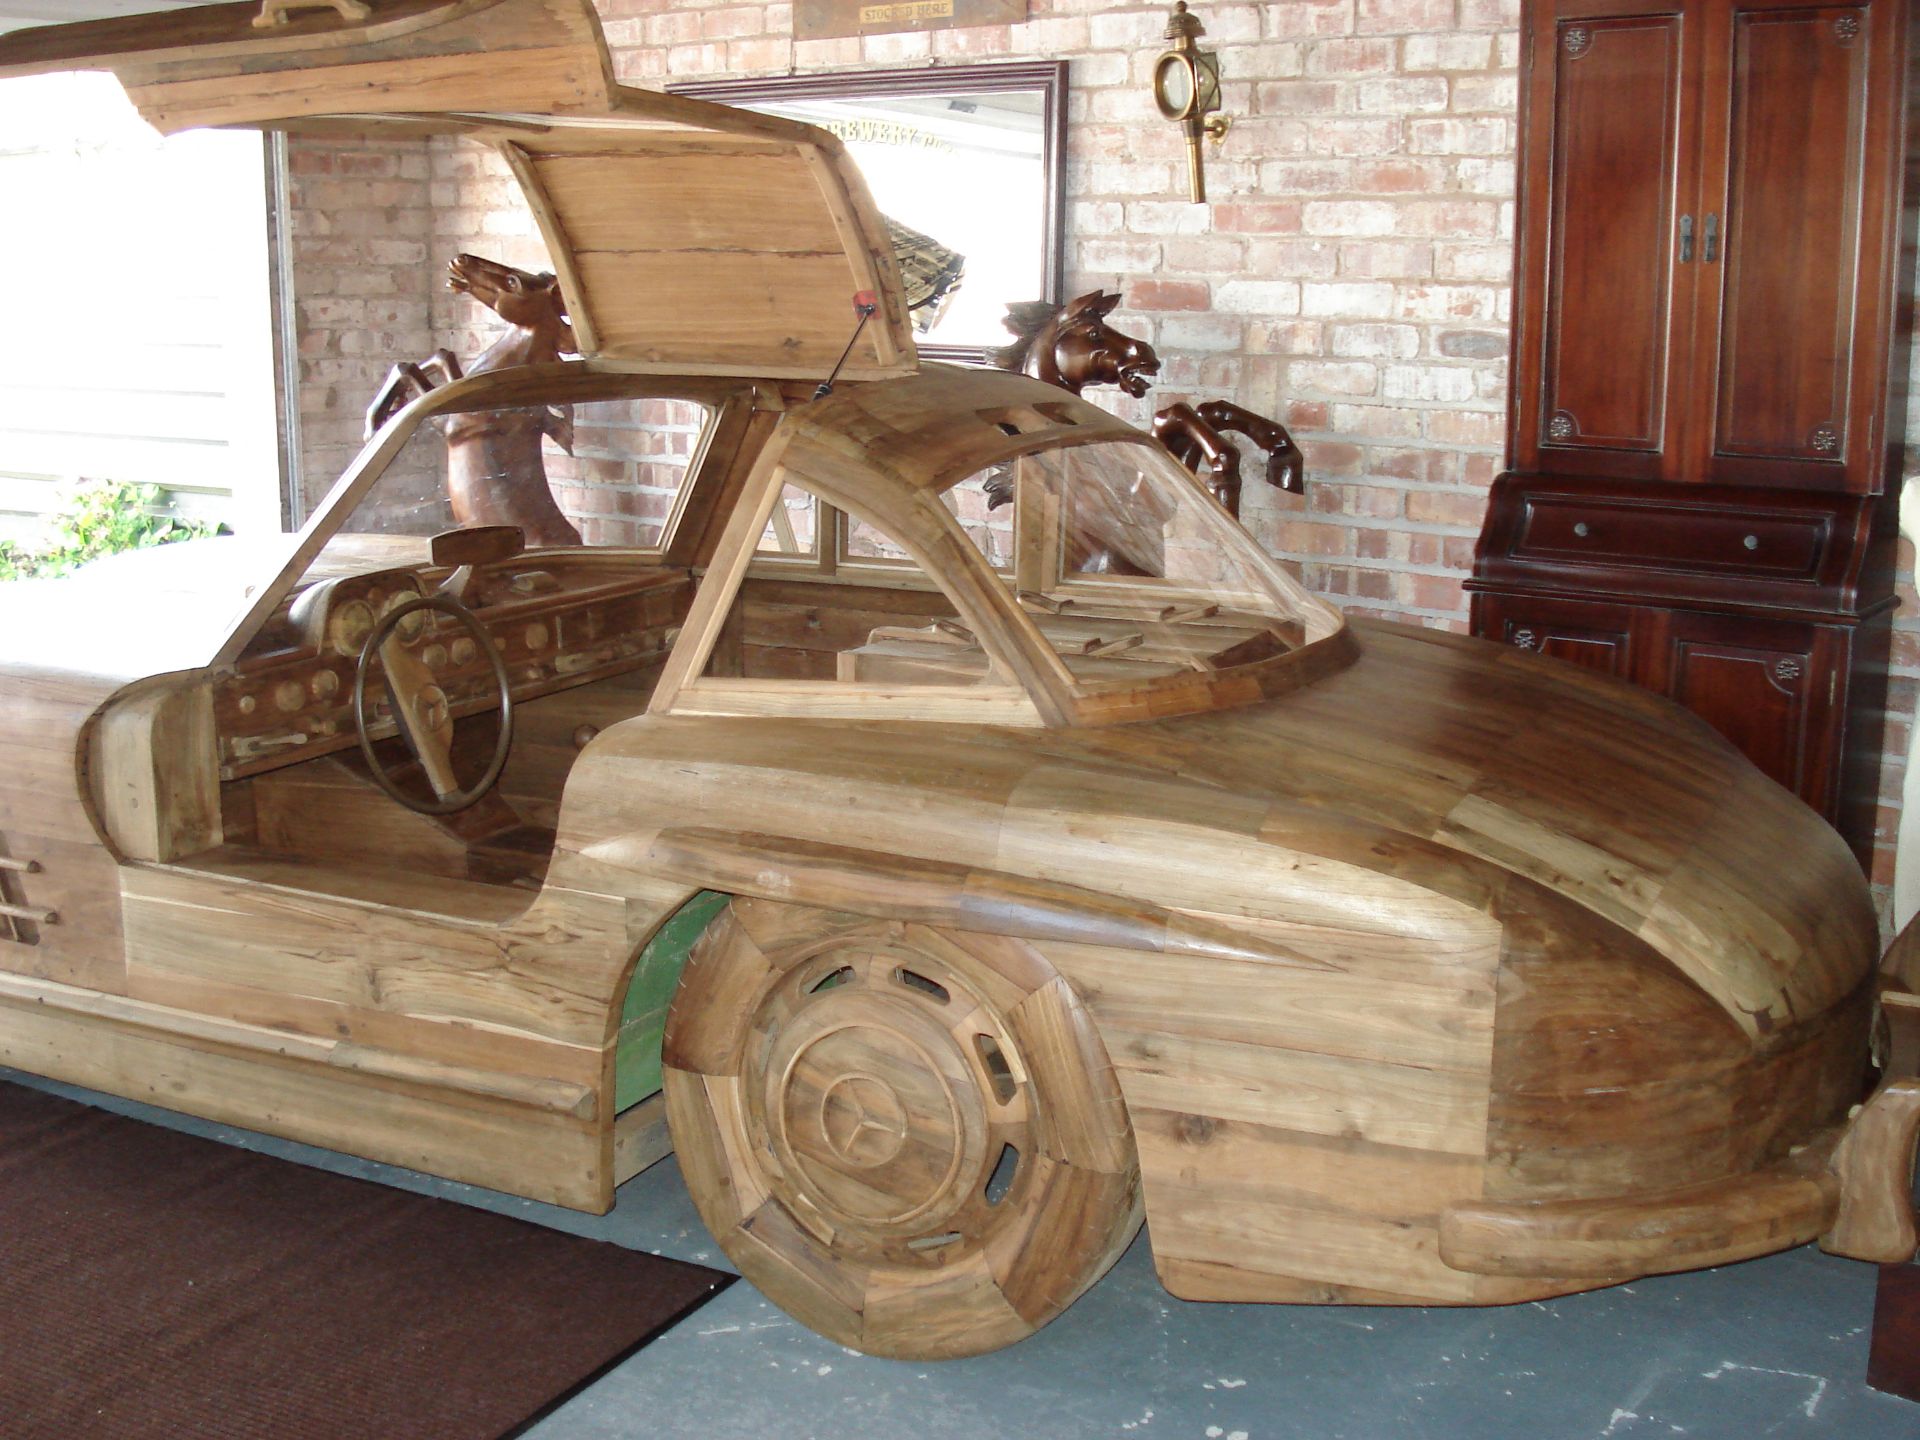 LIFESIZE HANDMADE EXCEPTIONAL SOLID TEAK UNIQUE MERCEDES BENZ GULLWING  Appraisal:  Serial No: - Image 8 of 8